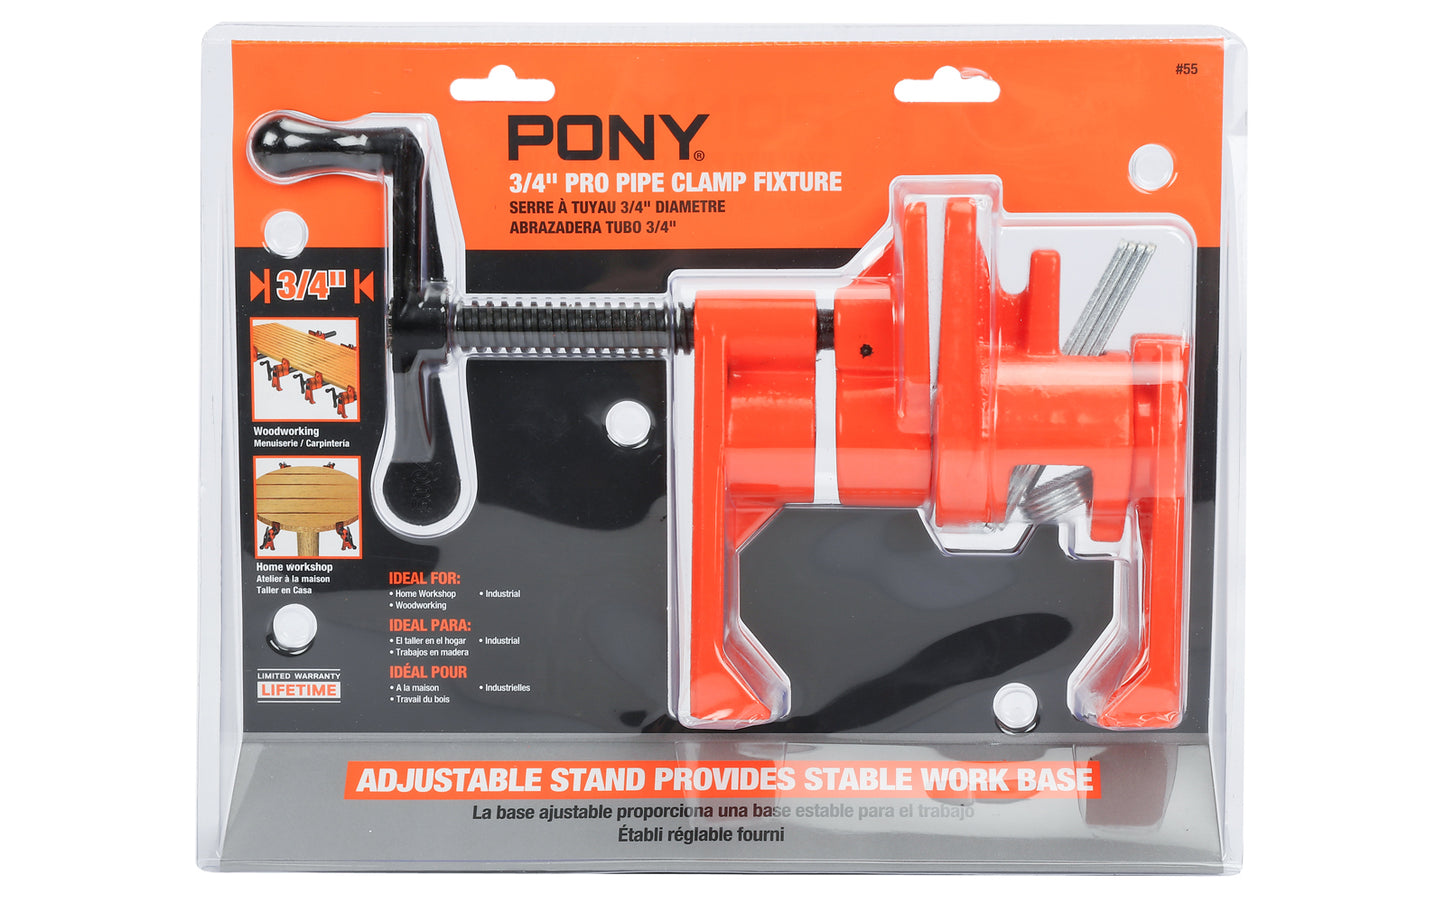 Pony Professional 3/4" Pipe Clamp Fixture ~ No. 55 - Pony / Jorgensen Heavy duty professional model - Adjustable stand provides stable work base - Large Clamping Face -1-3/4" - Crank Handle - Industrial pipe clamp - #55